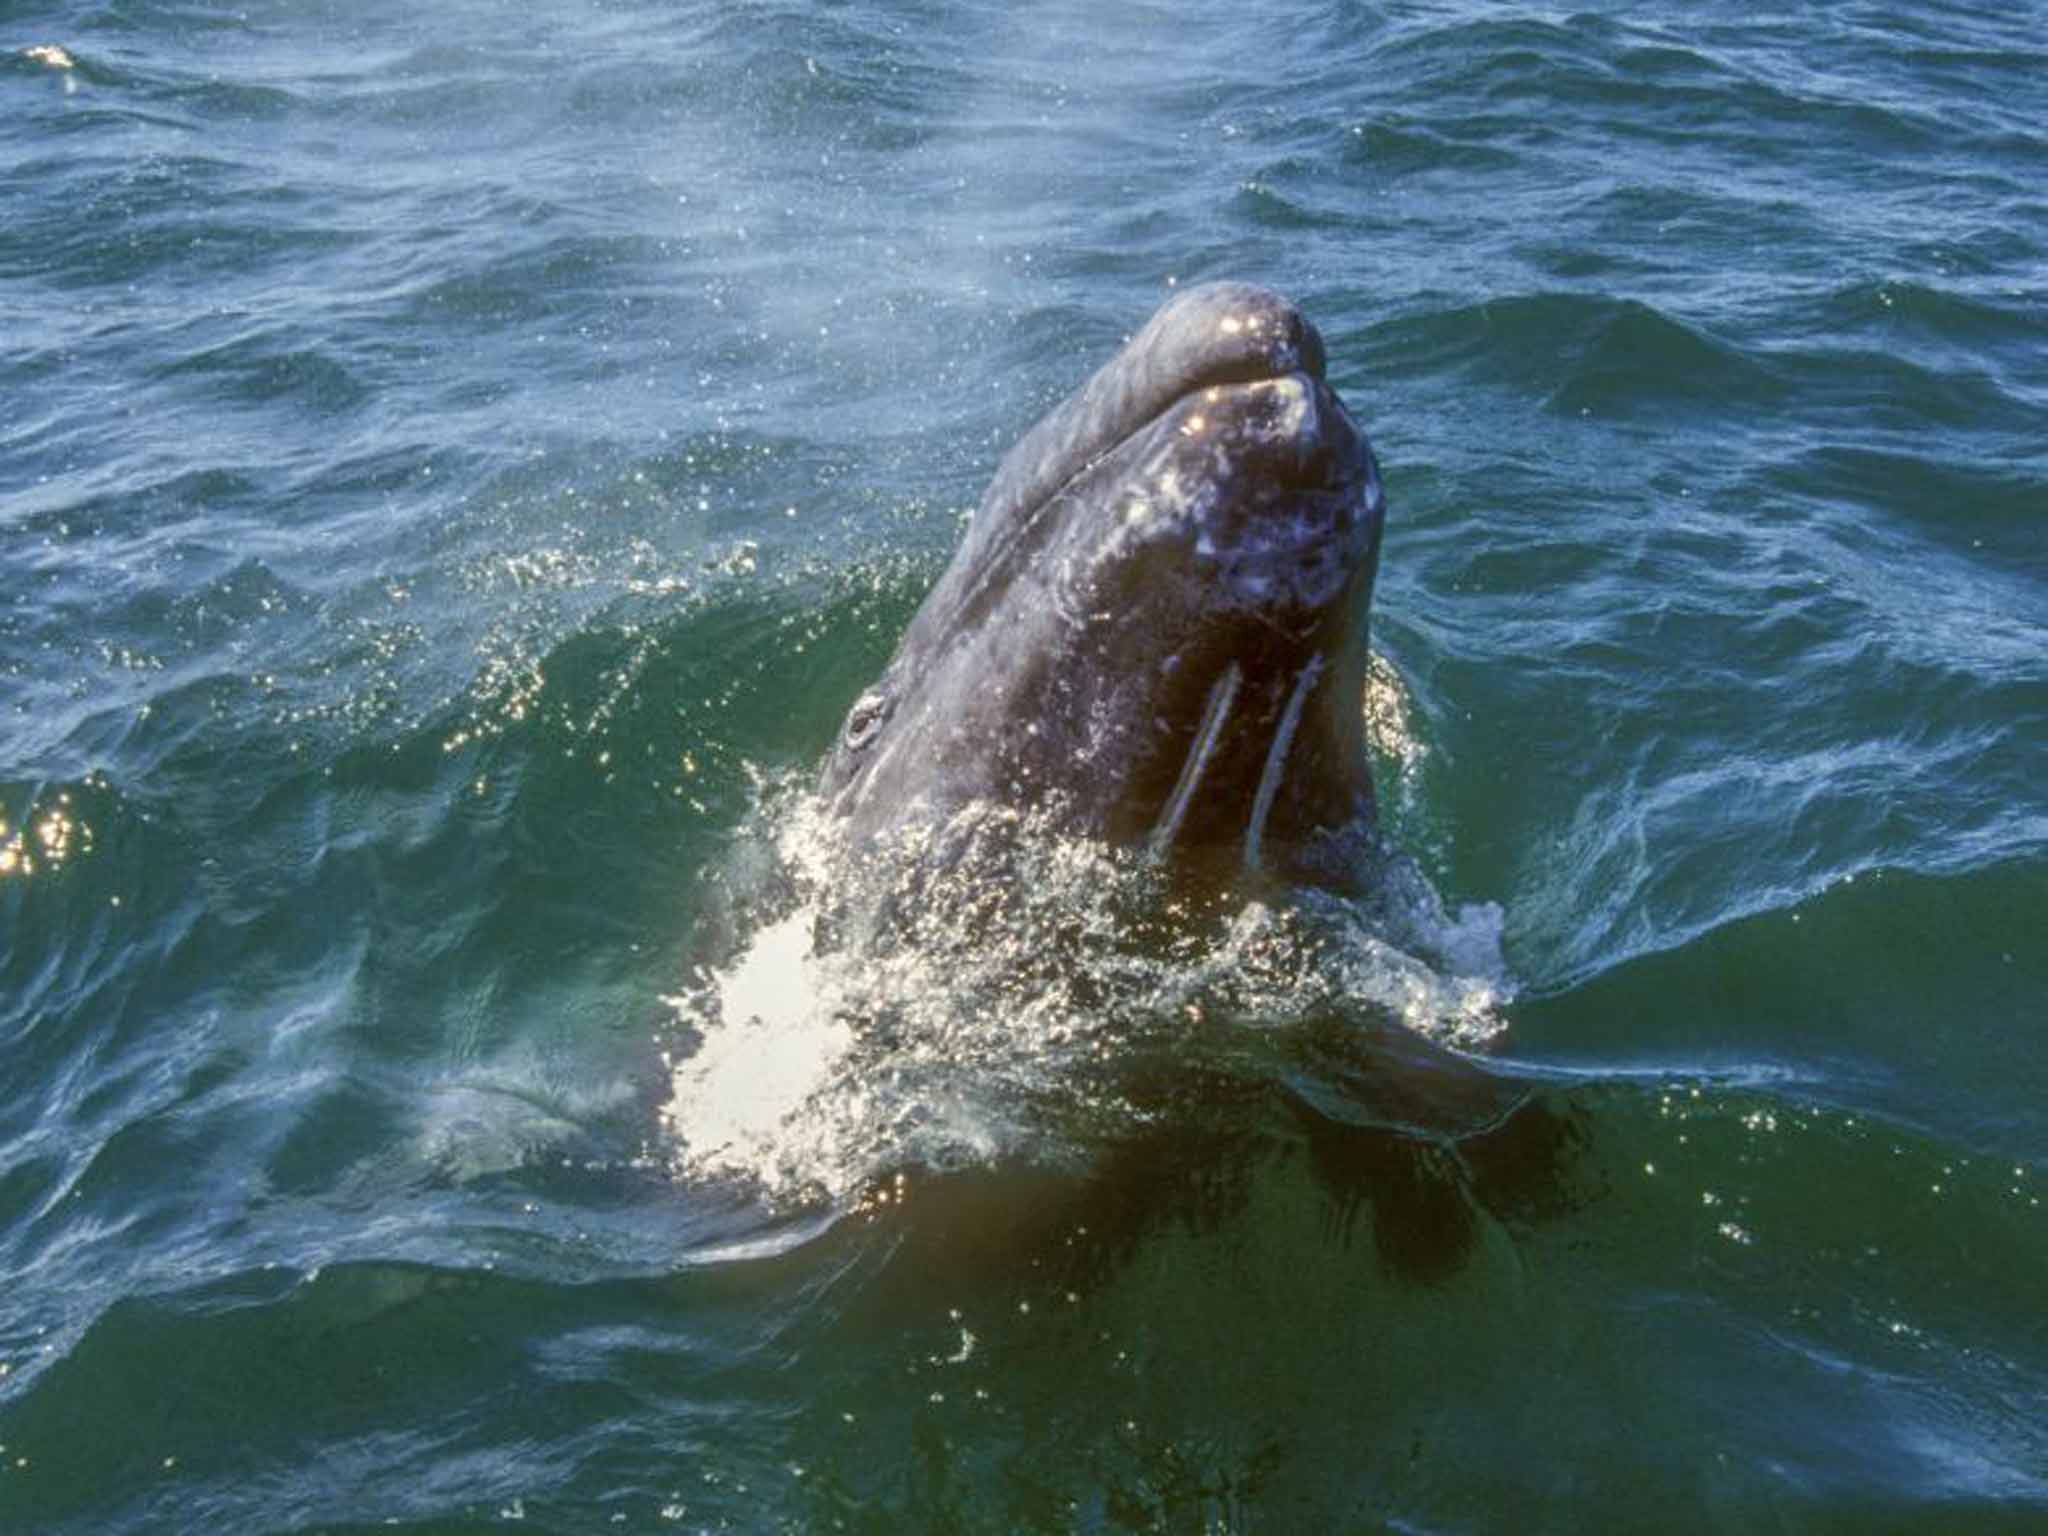 Grey whales can weigh up to 36 tonnes